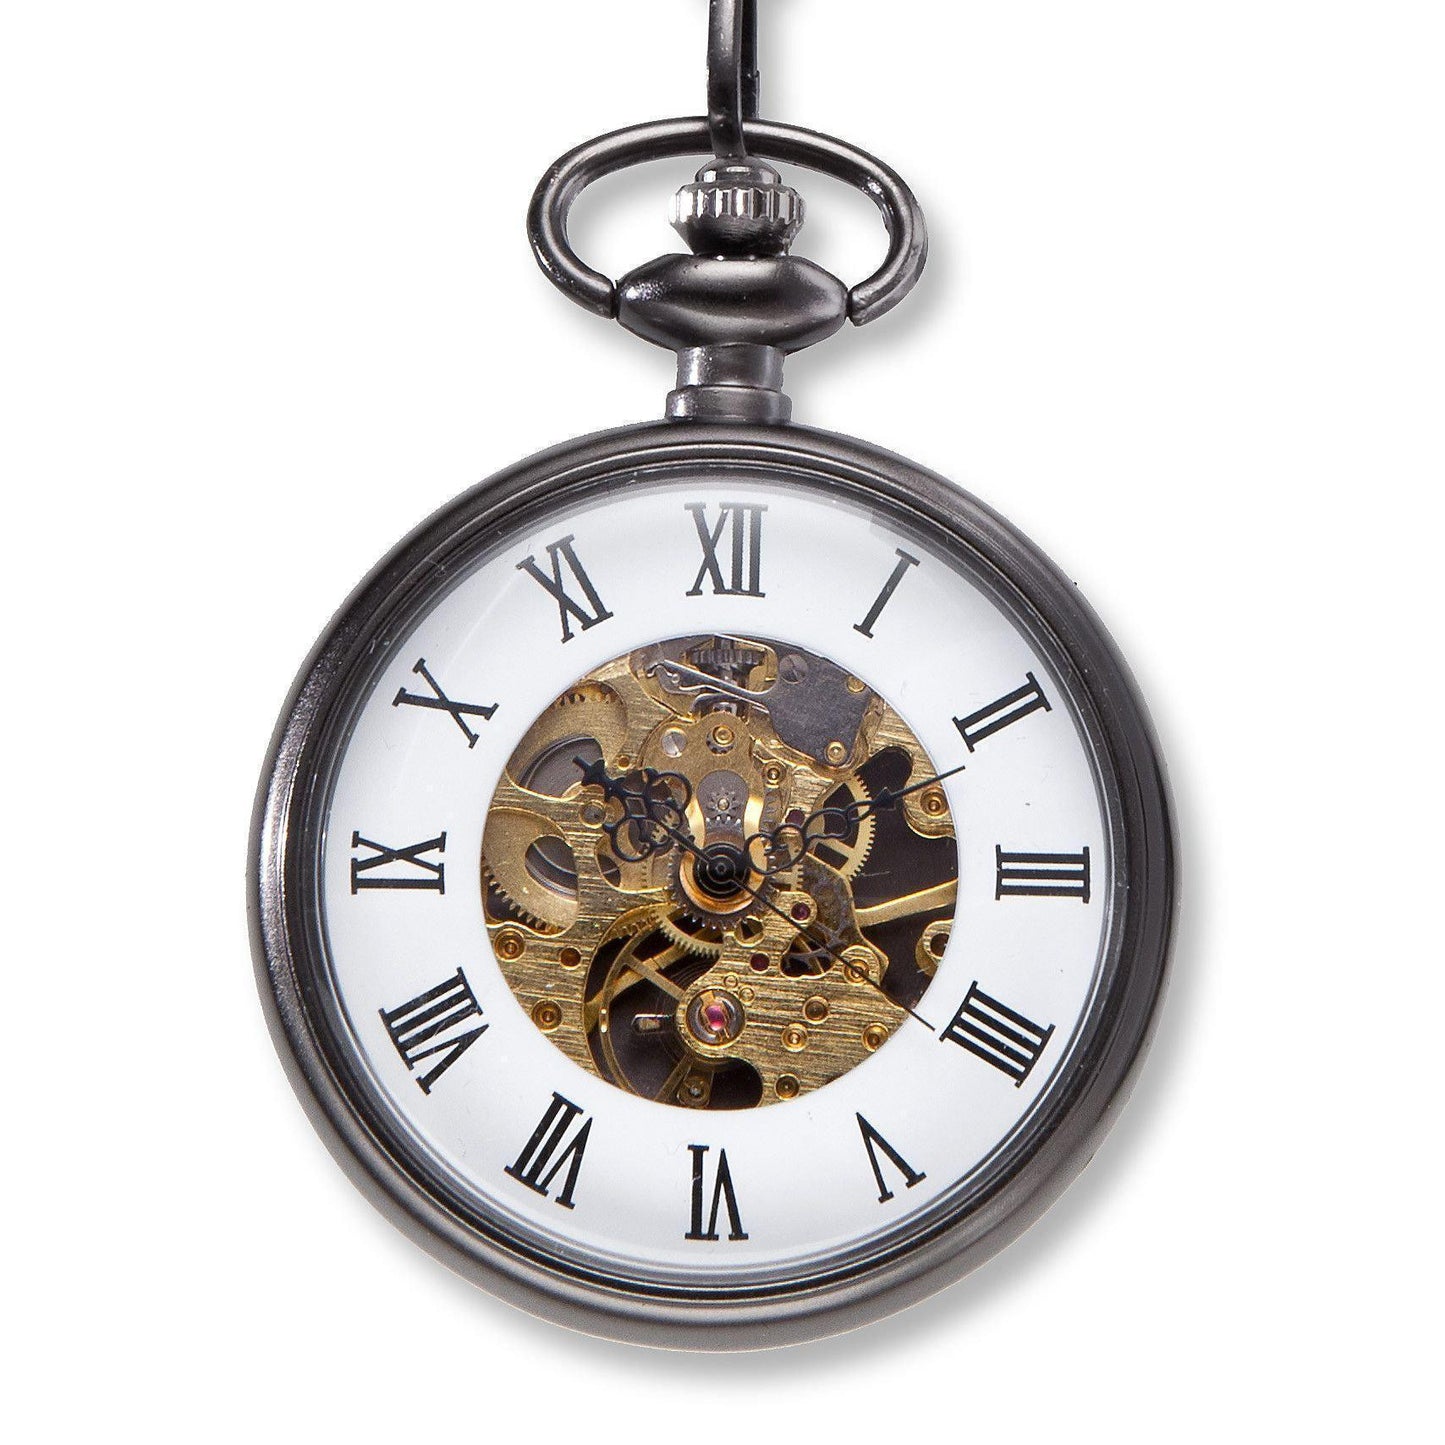 Counting Down Until I Do Pocket Watch